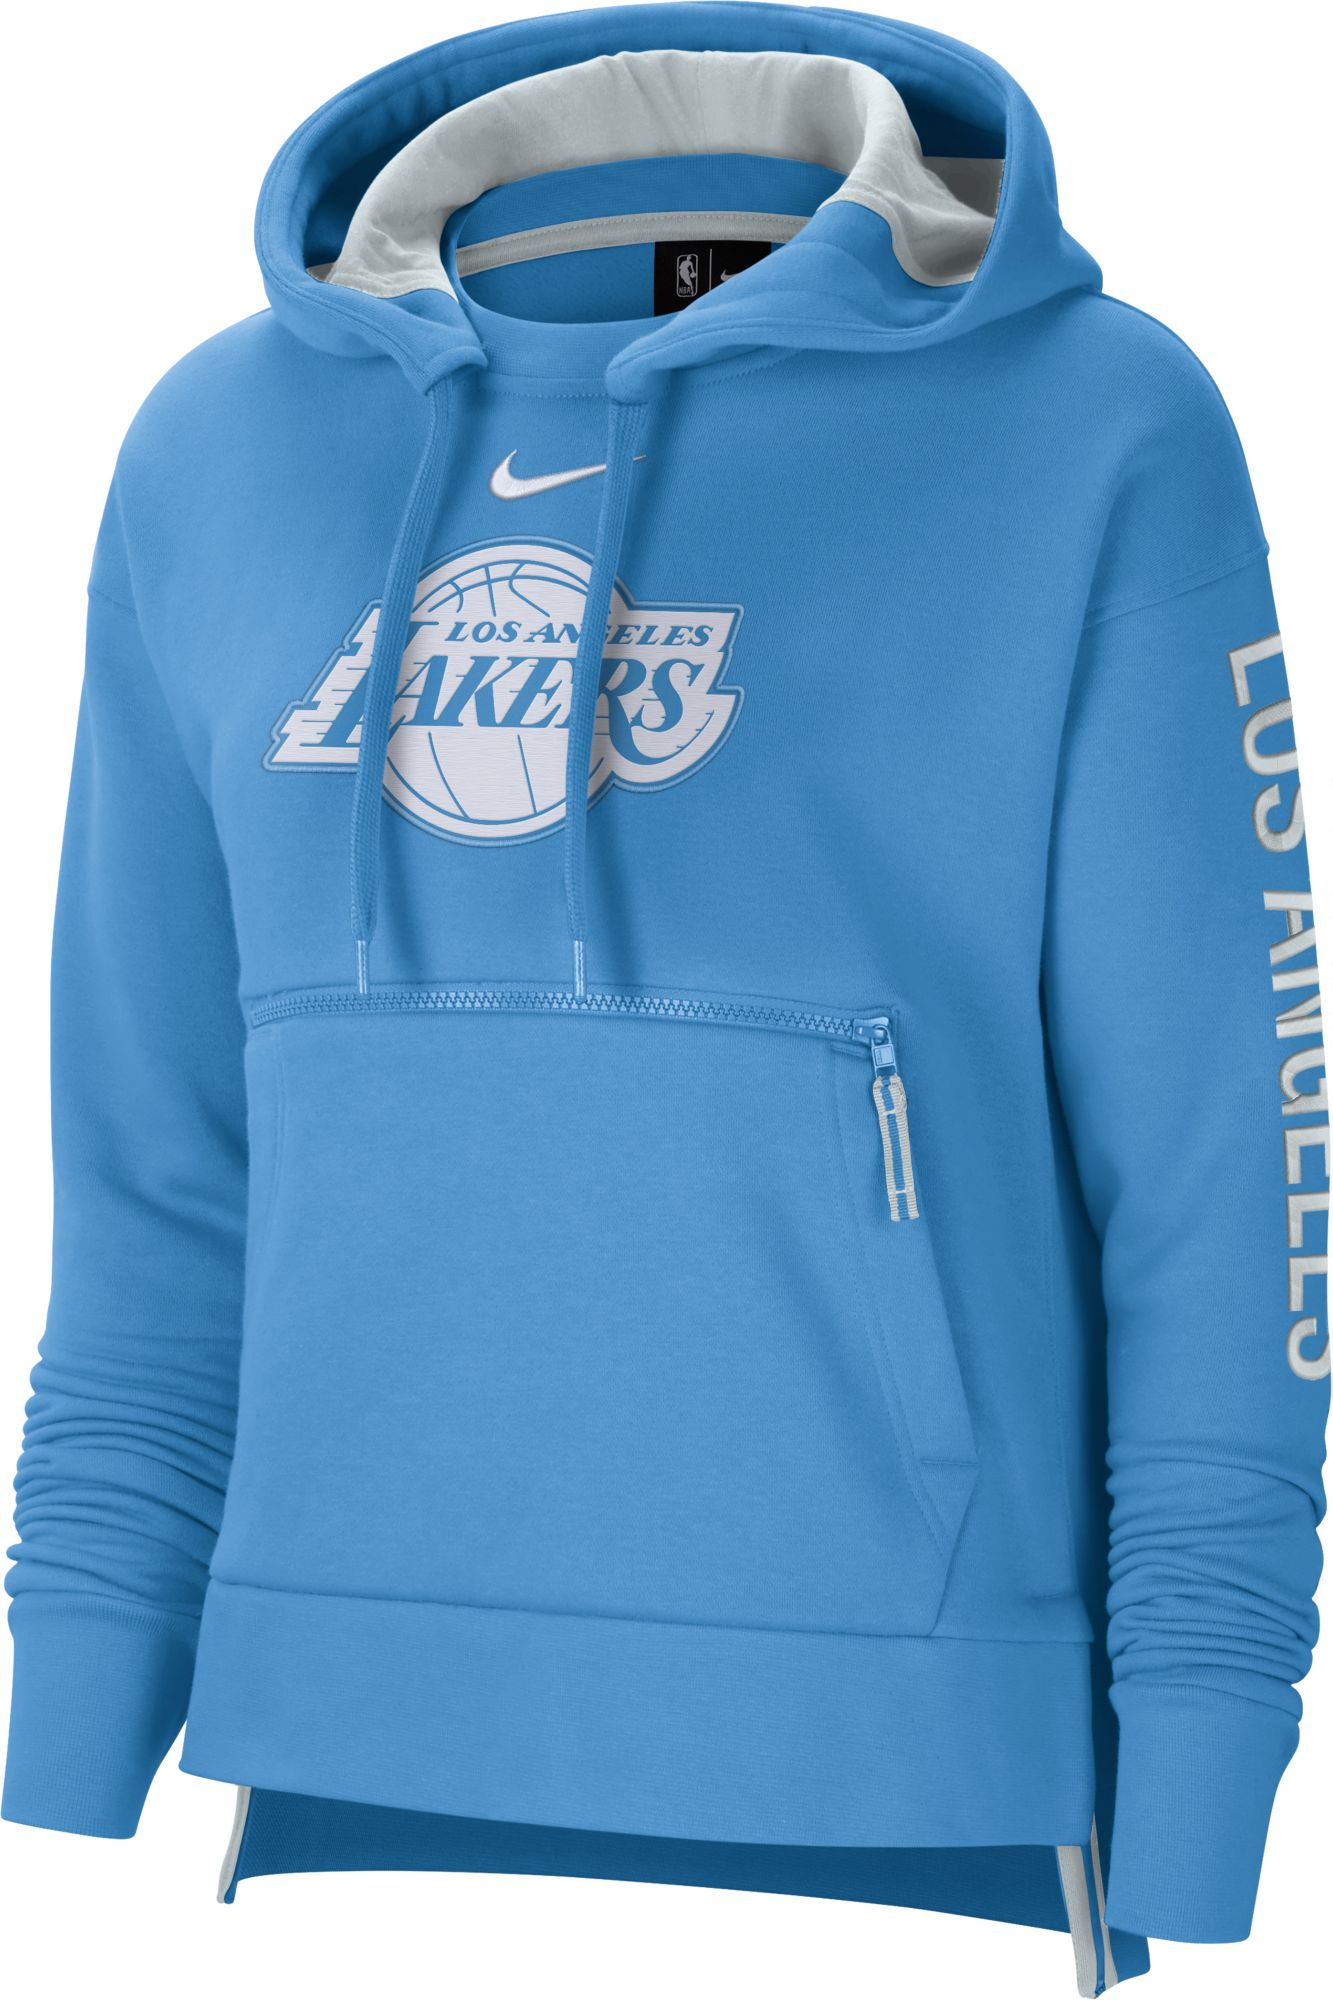 lakers city edition hoodie